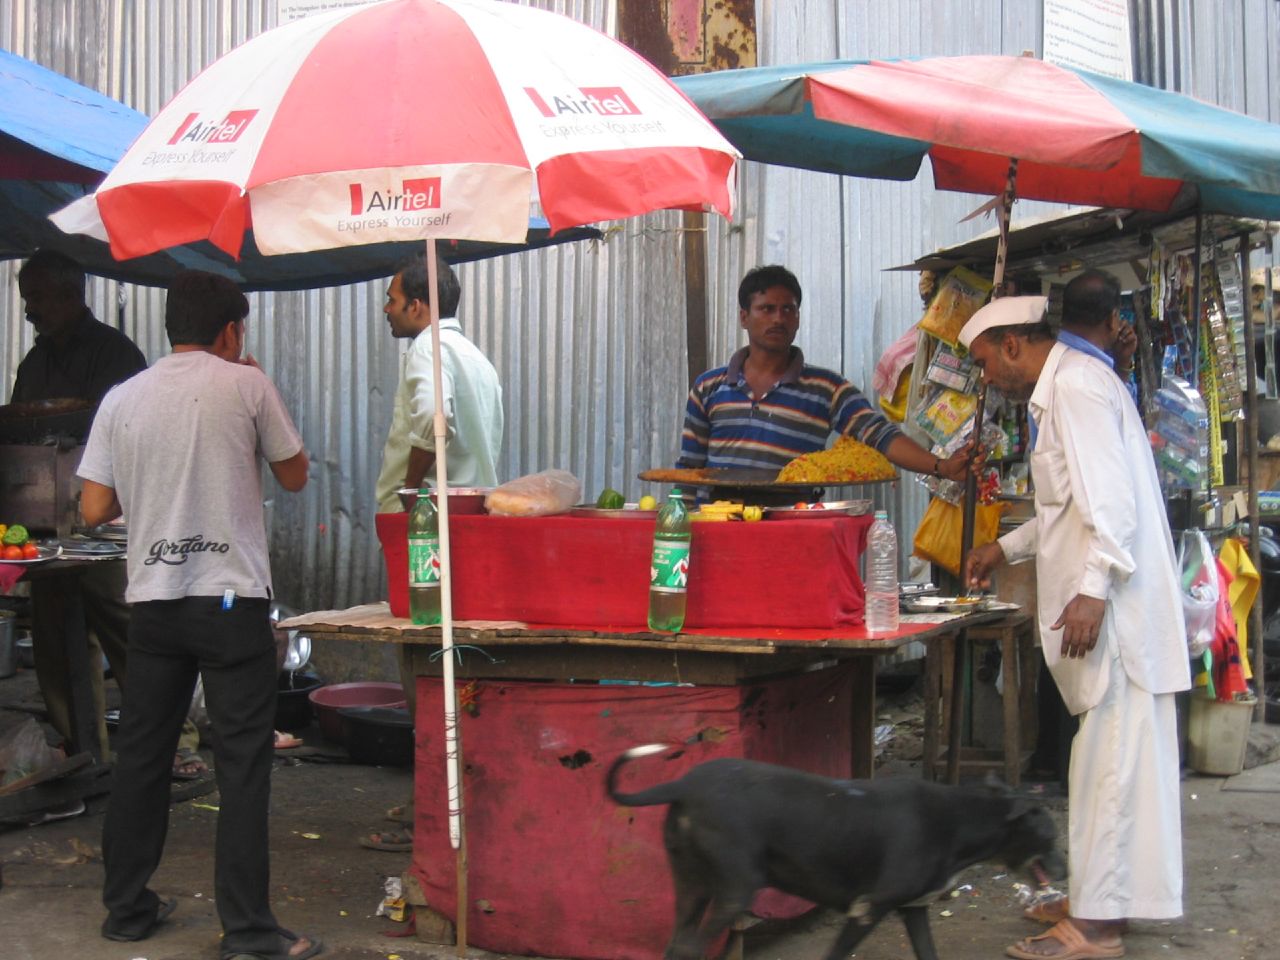 a man is standing behind his stall selling food